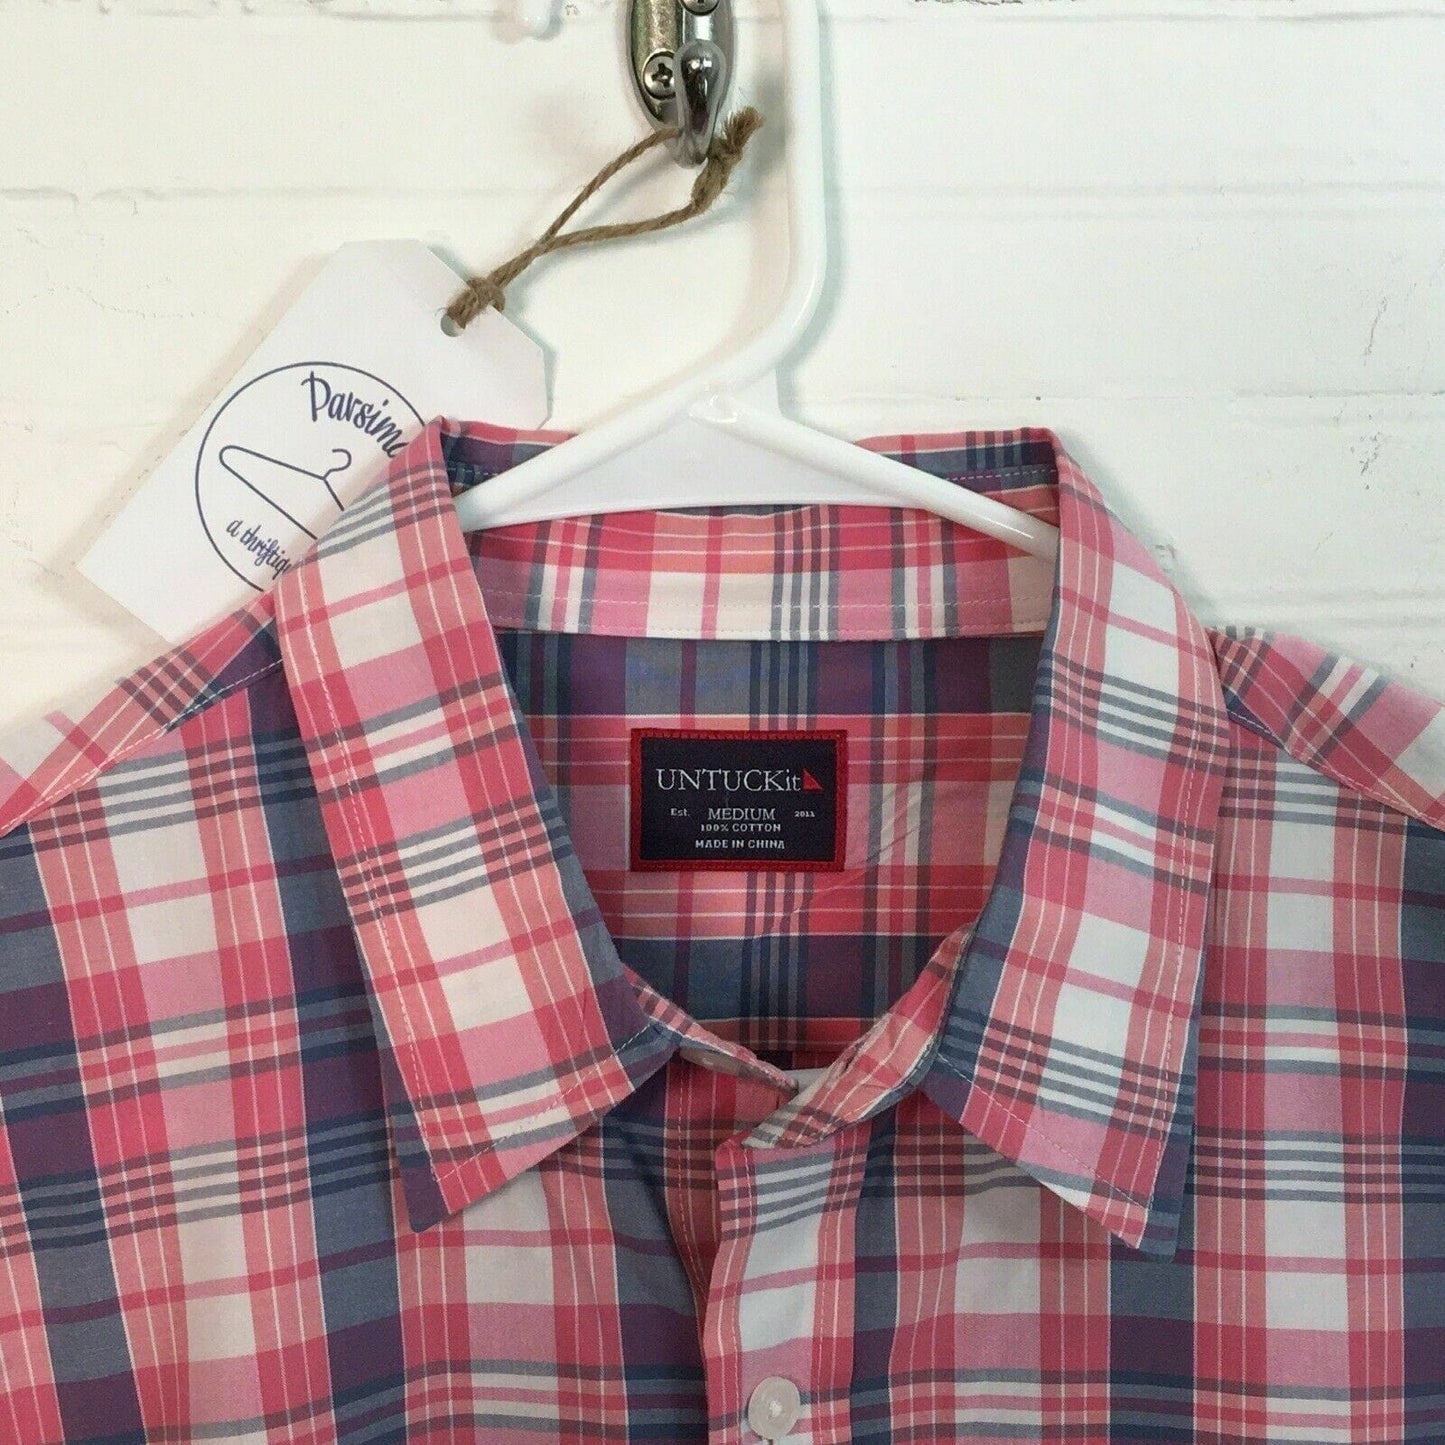 Sophisticated UNTUCKit Mens Button Up Shirt - Wrinkle Free - Size M - White/Pink Plaid